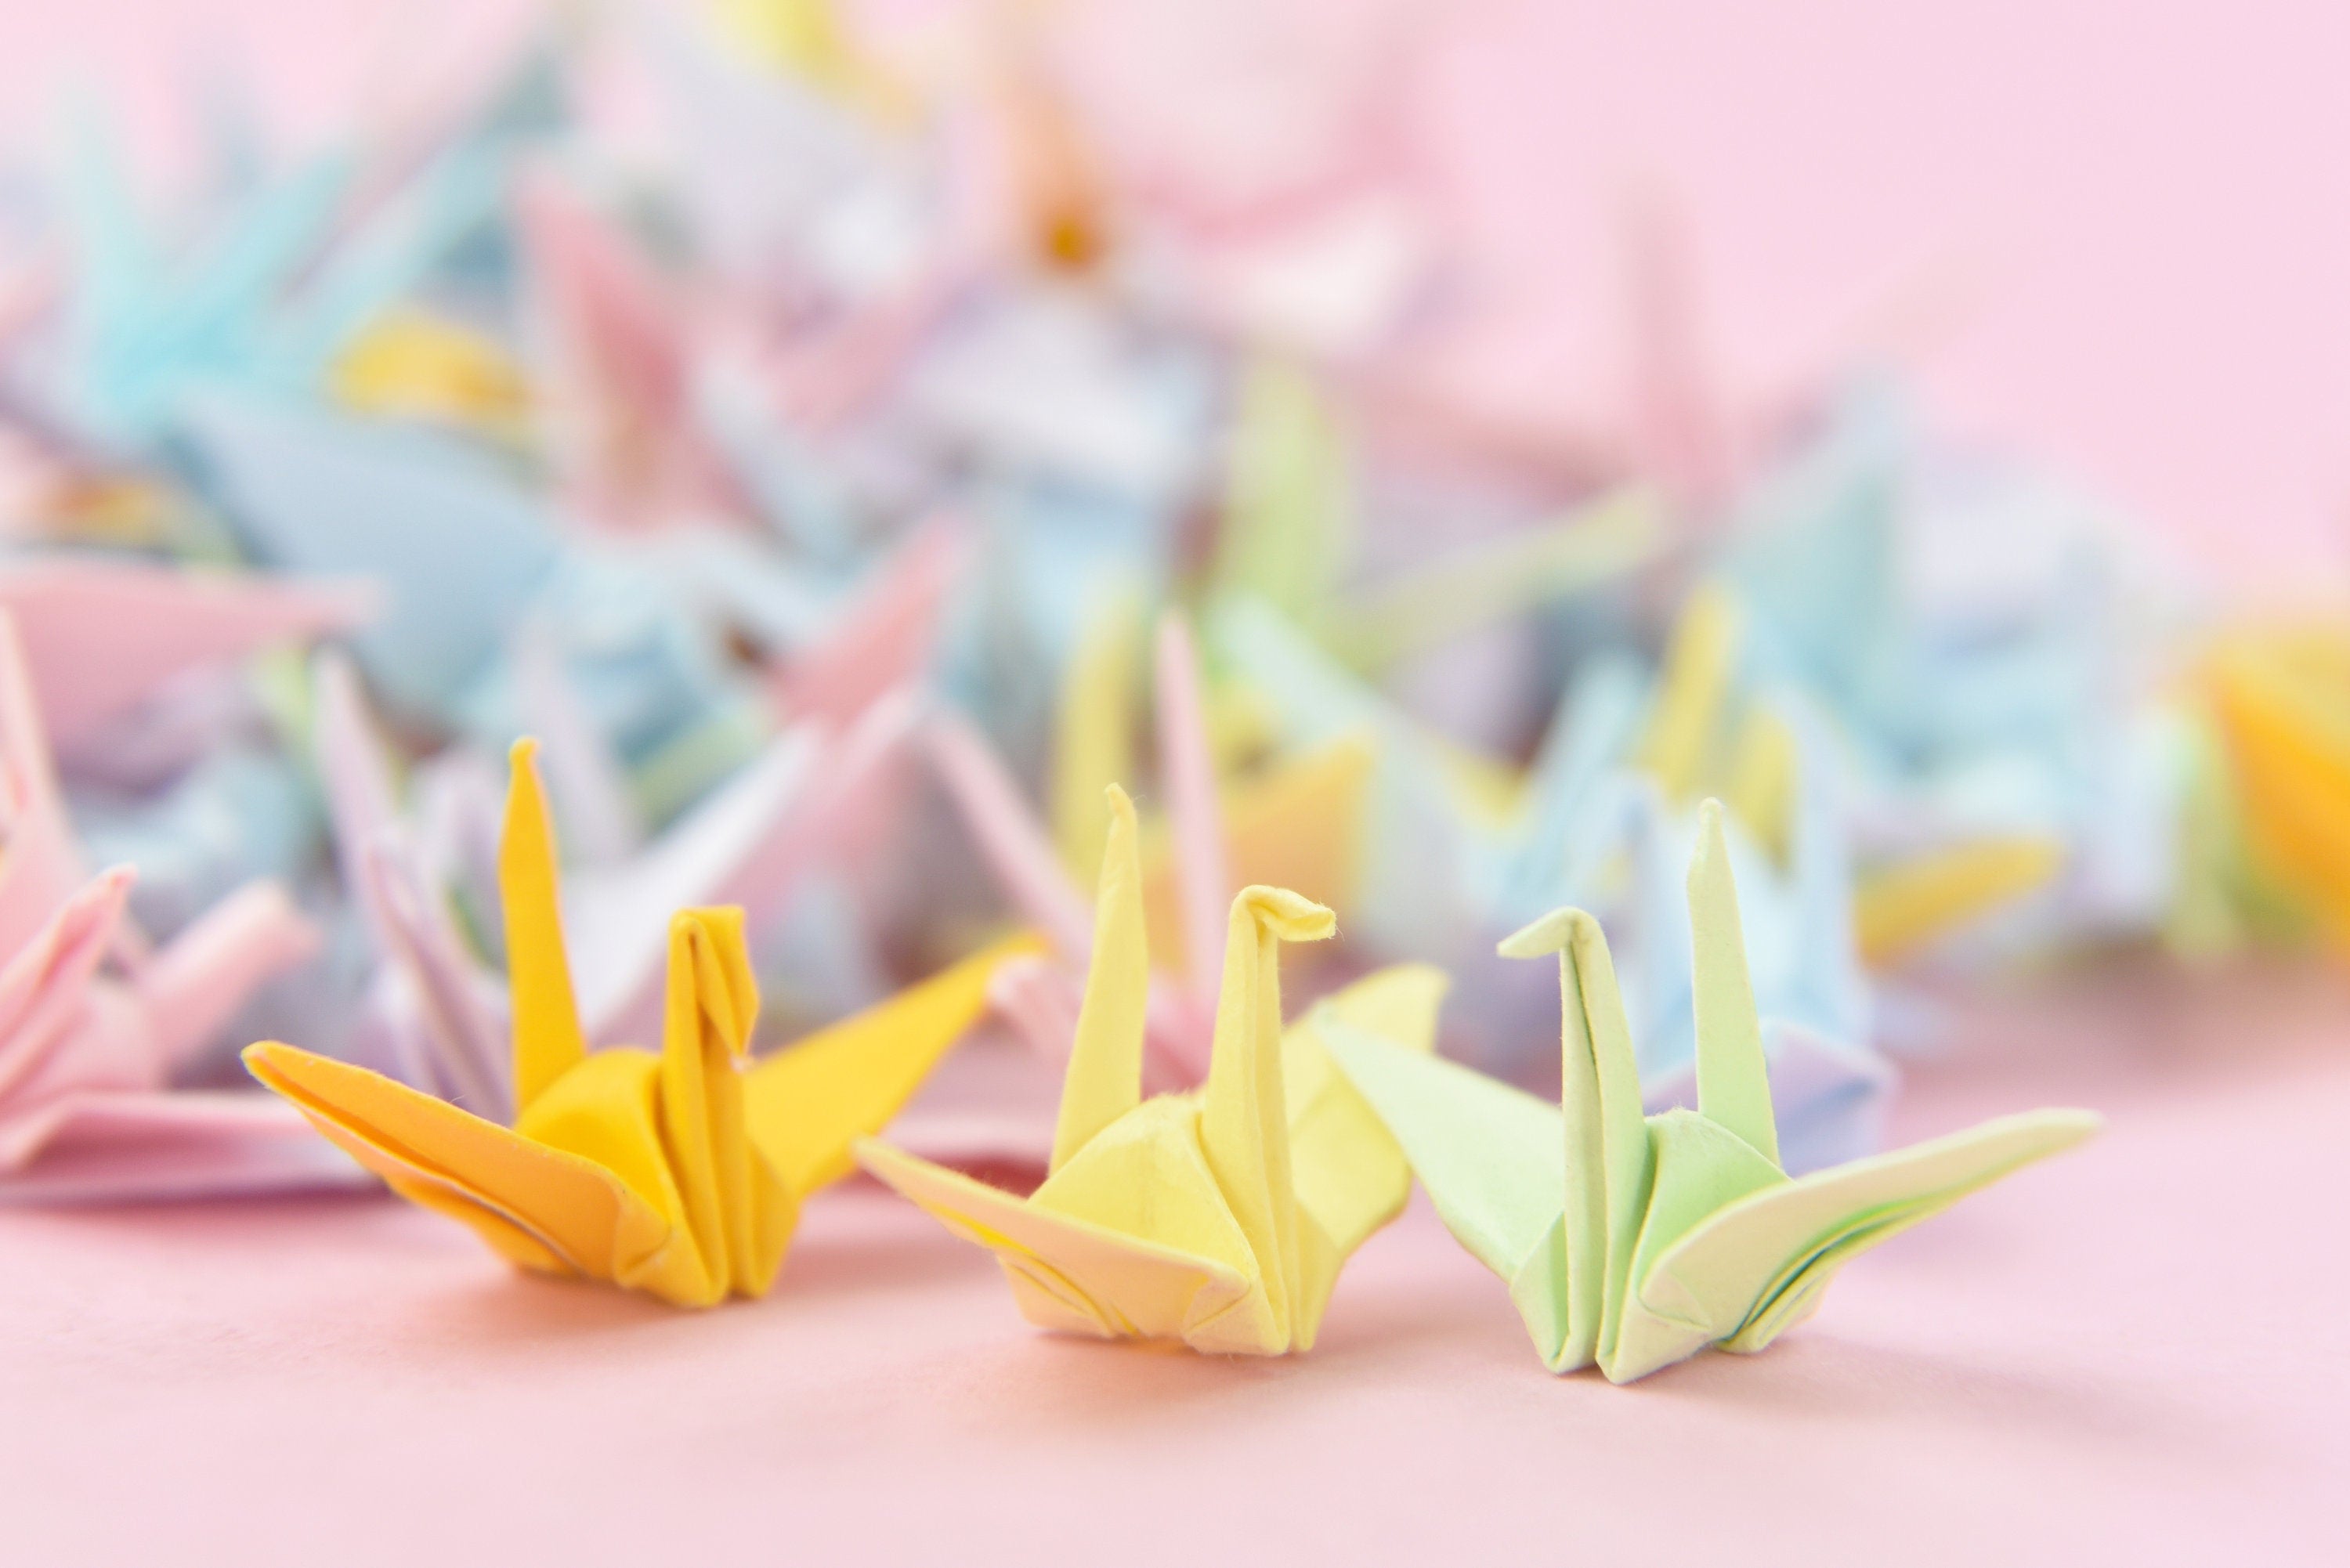 100 Origami Paper Crane Mixed Color 3.81 cm (1.5 inches) Japanese Origami Wedding Gift, Decoration, Wedding Backdrop